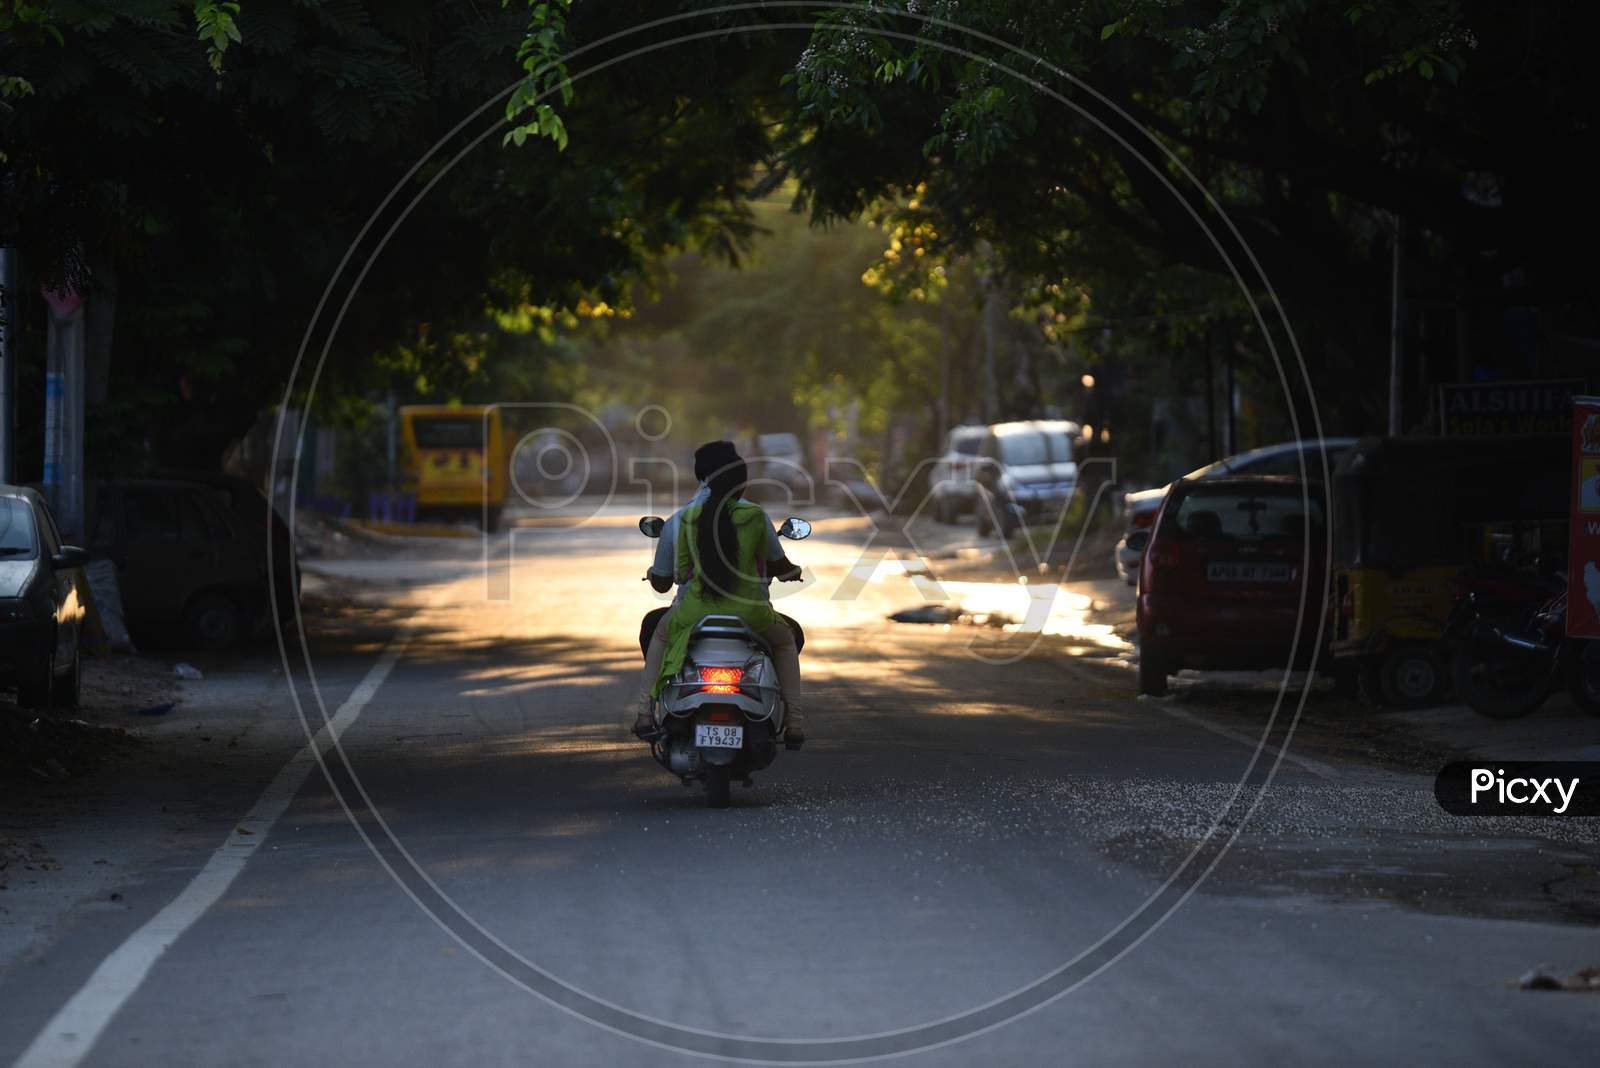 a two wheeler vehicle moving on an empty road during nstionwide lockdown amid coronavirus pandemic, April 2020